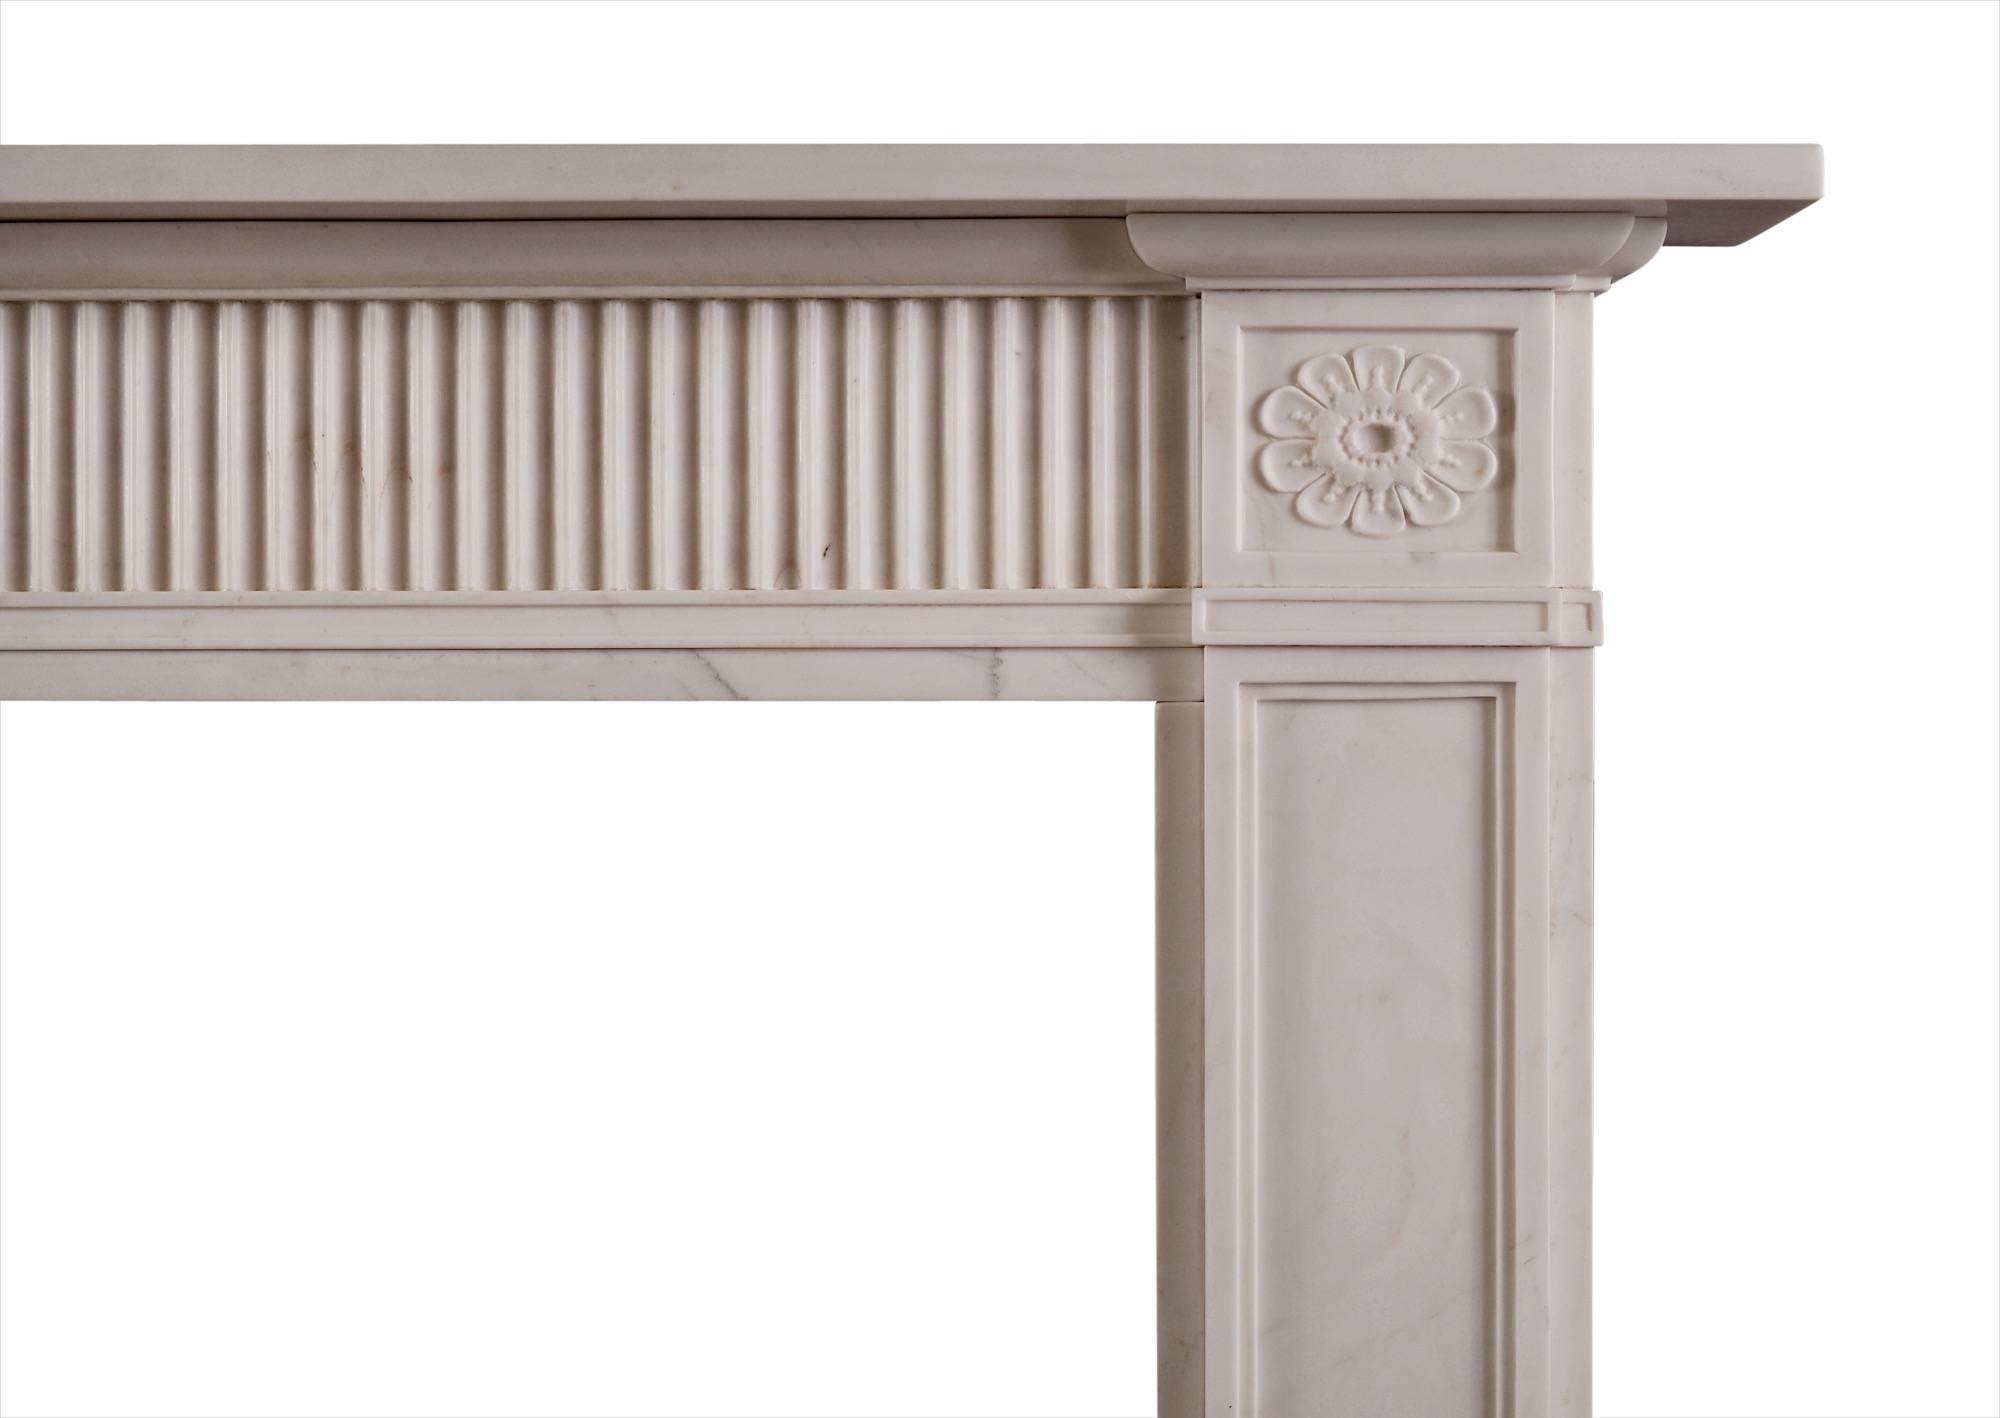 An elegant late 18th century style white marble fireplace, with fluted frieze and panelled jambs. The side blockings beautifully carved with delicate flowers. Attractive moulding beneath frieze and blockings. A copy of a period original (circa 1790